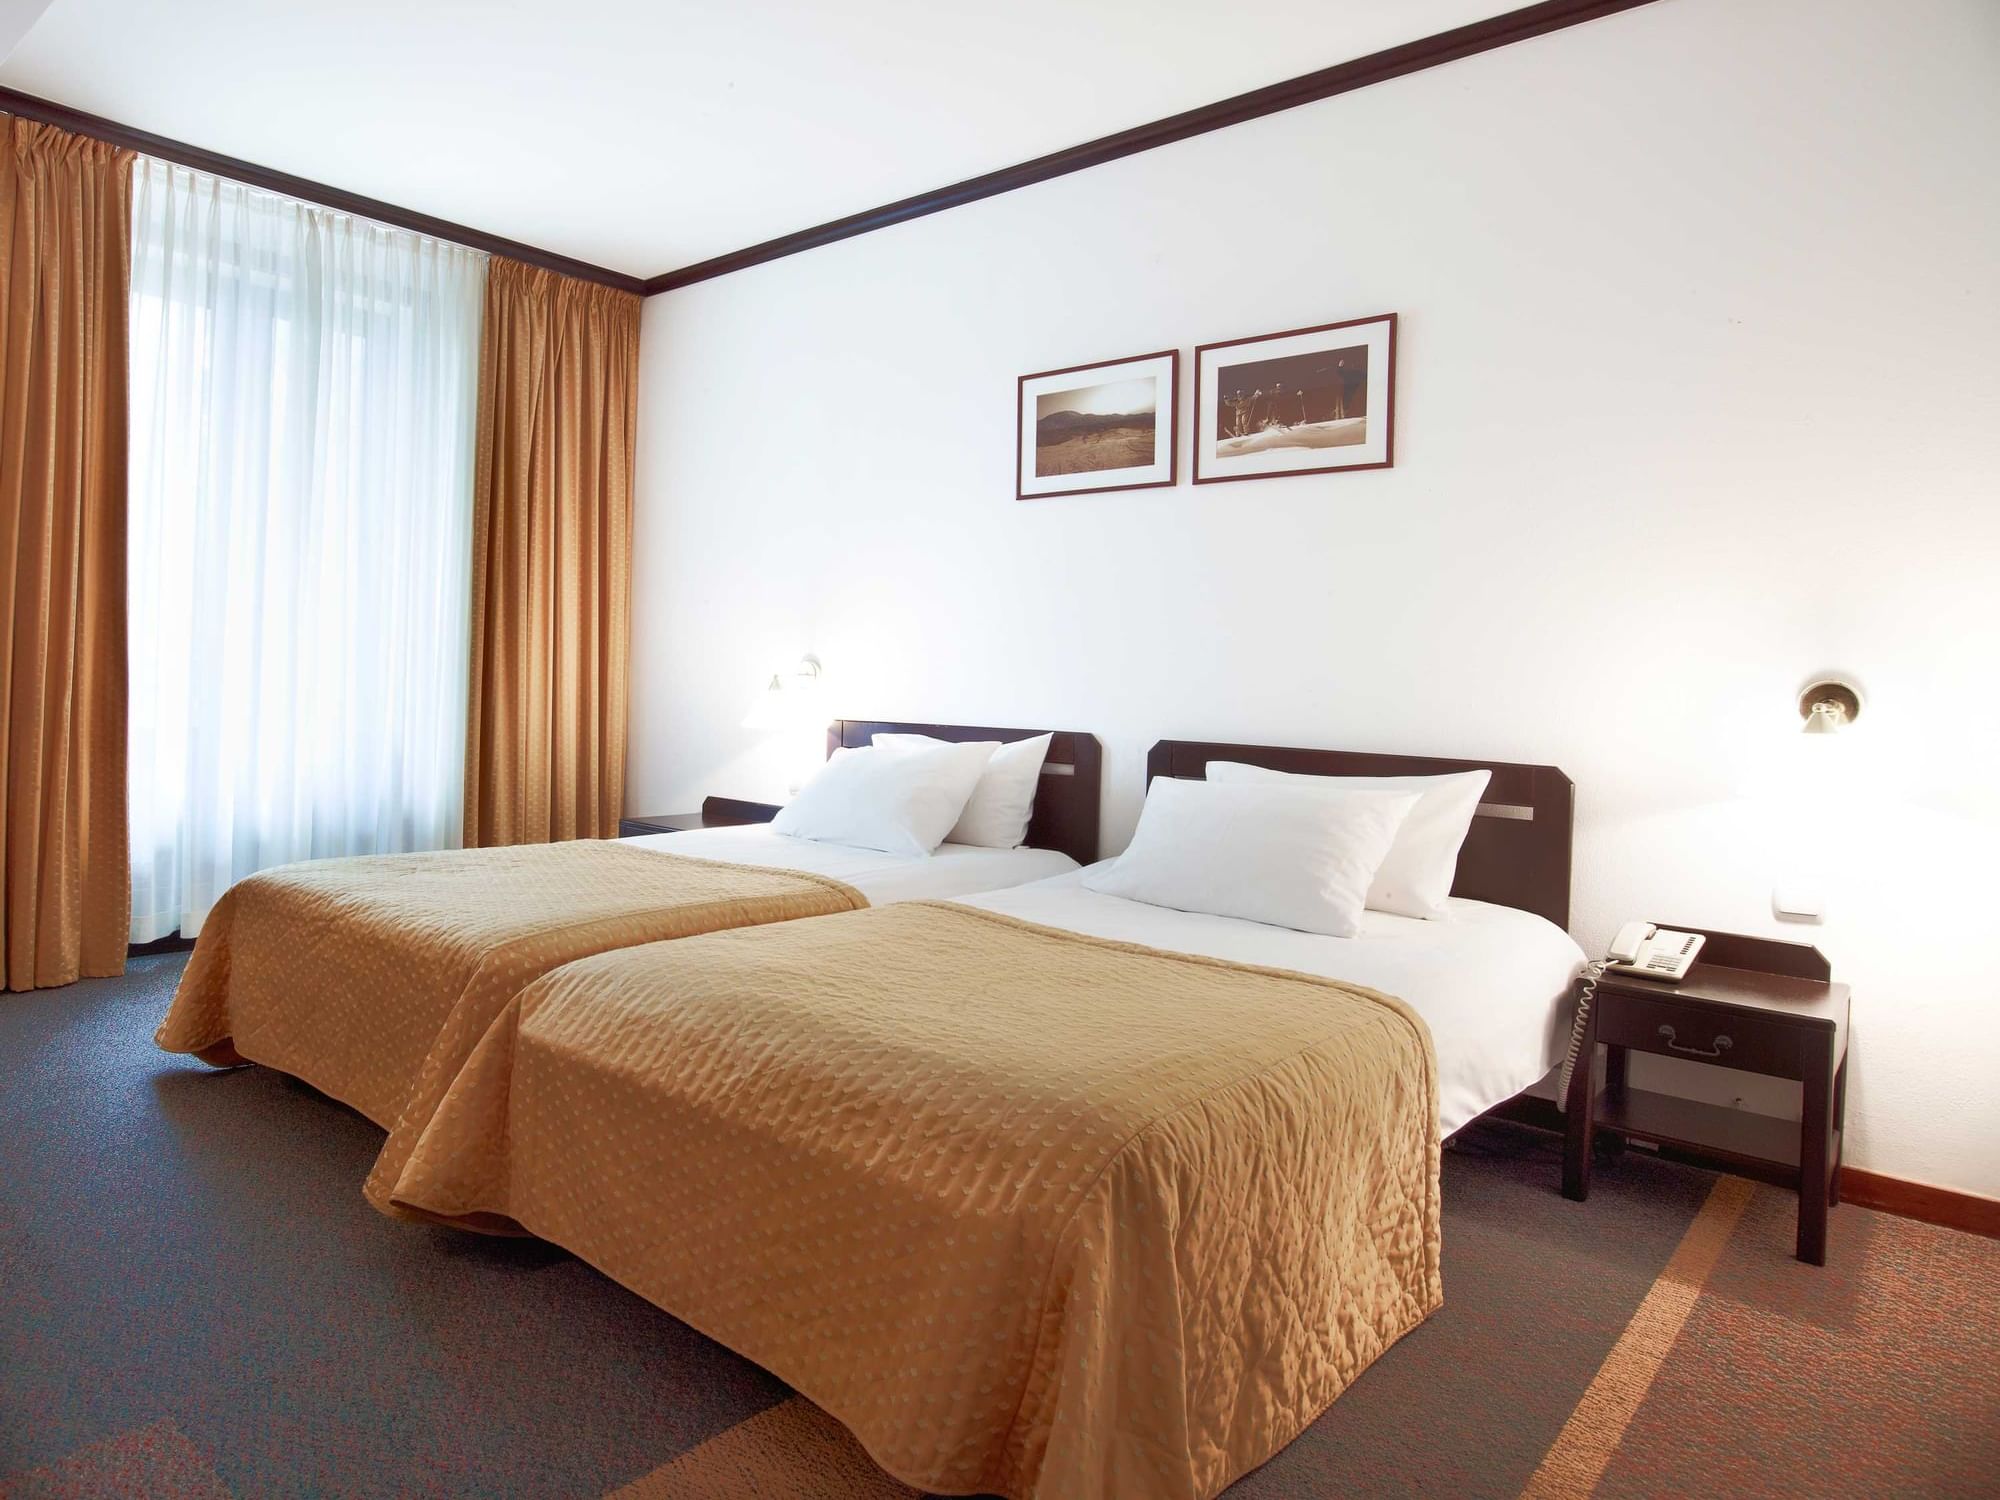 Twin Room with single beds at Ana Hotels Poiana